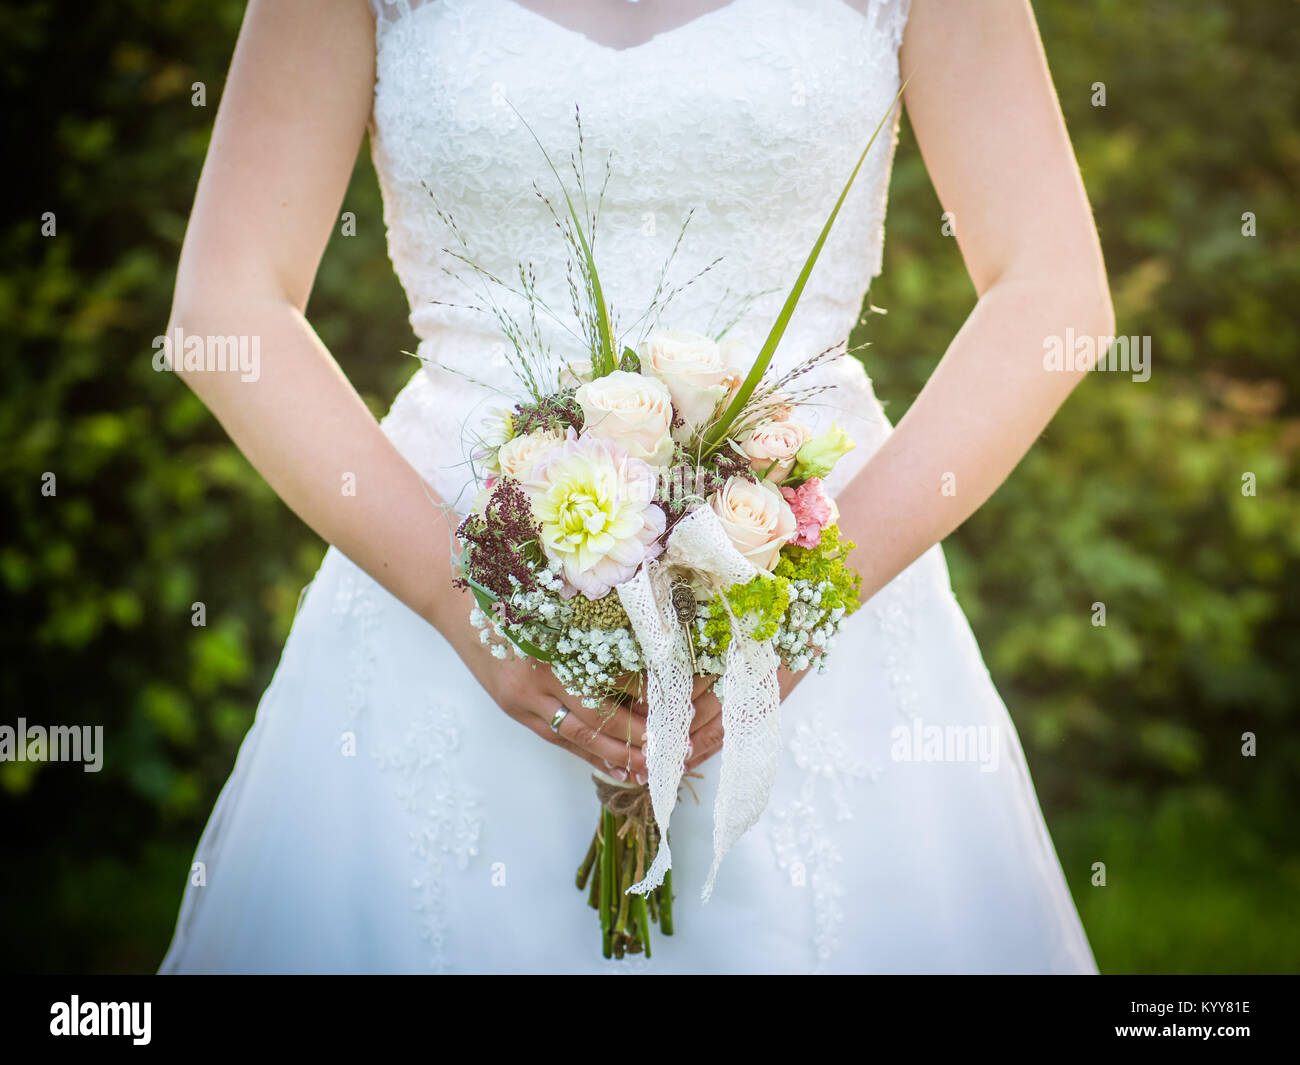 wedding bouquet with salomon-colored roses Stock Photo - Alamy